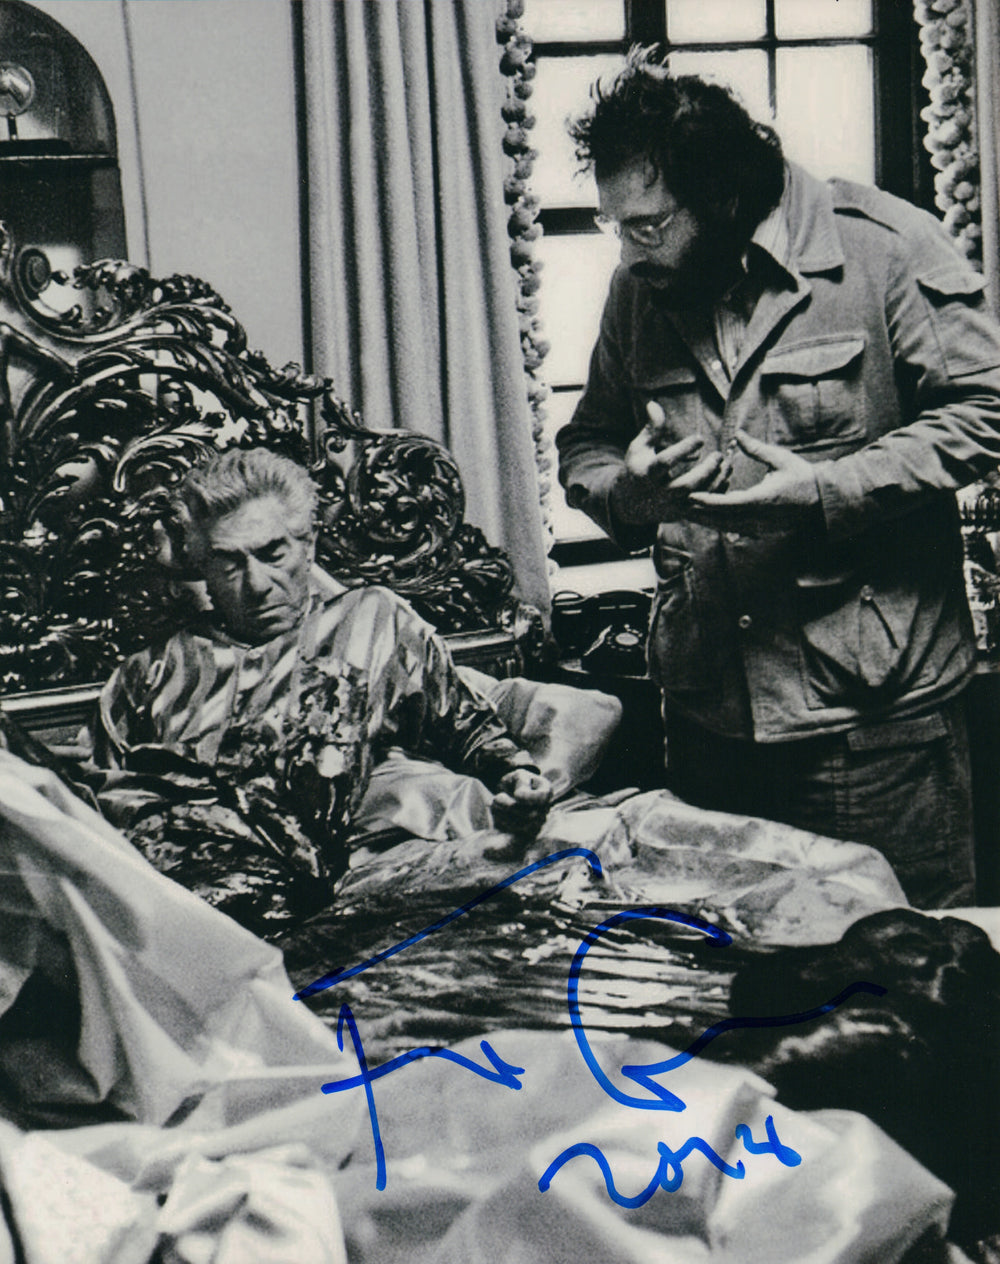 Francis Ford Coppola Director of The Godfather Signed 8x10 Photo